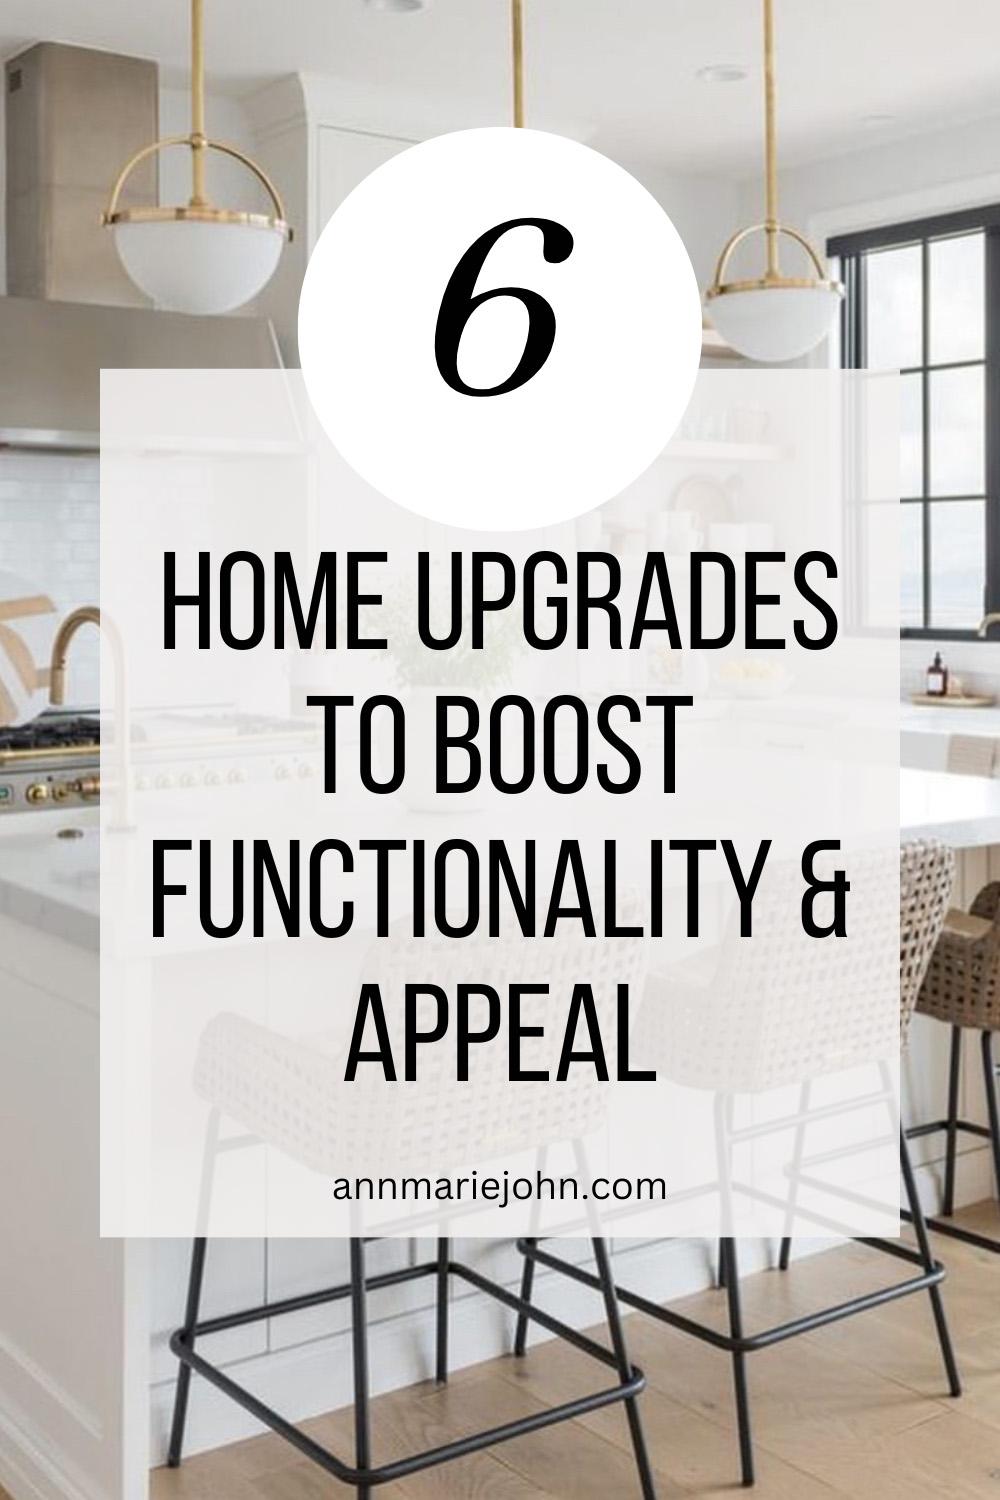 Home Upgrades to Boost Functionality & Appeal